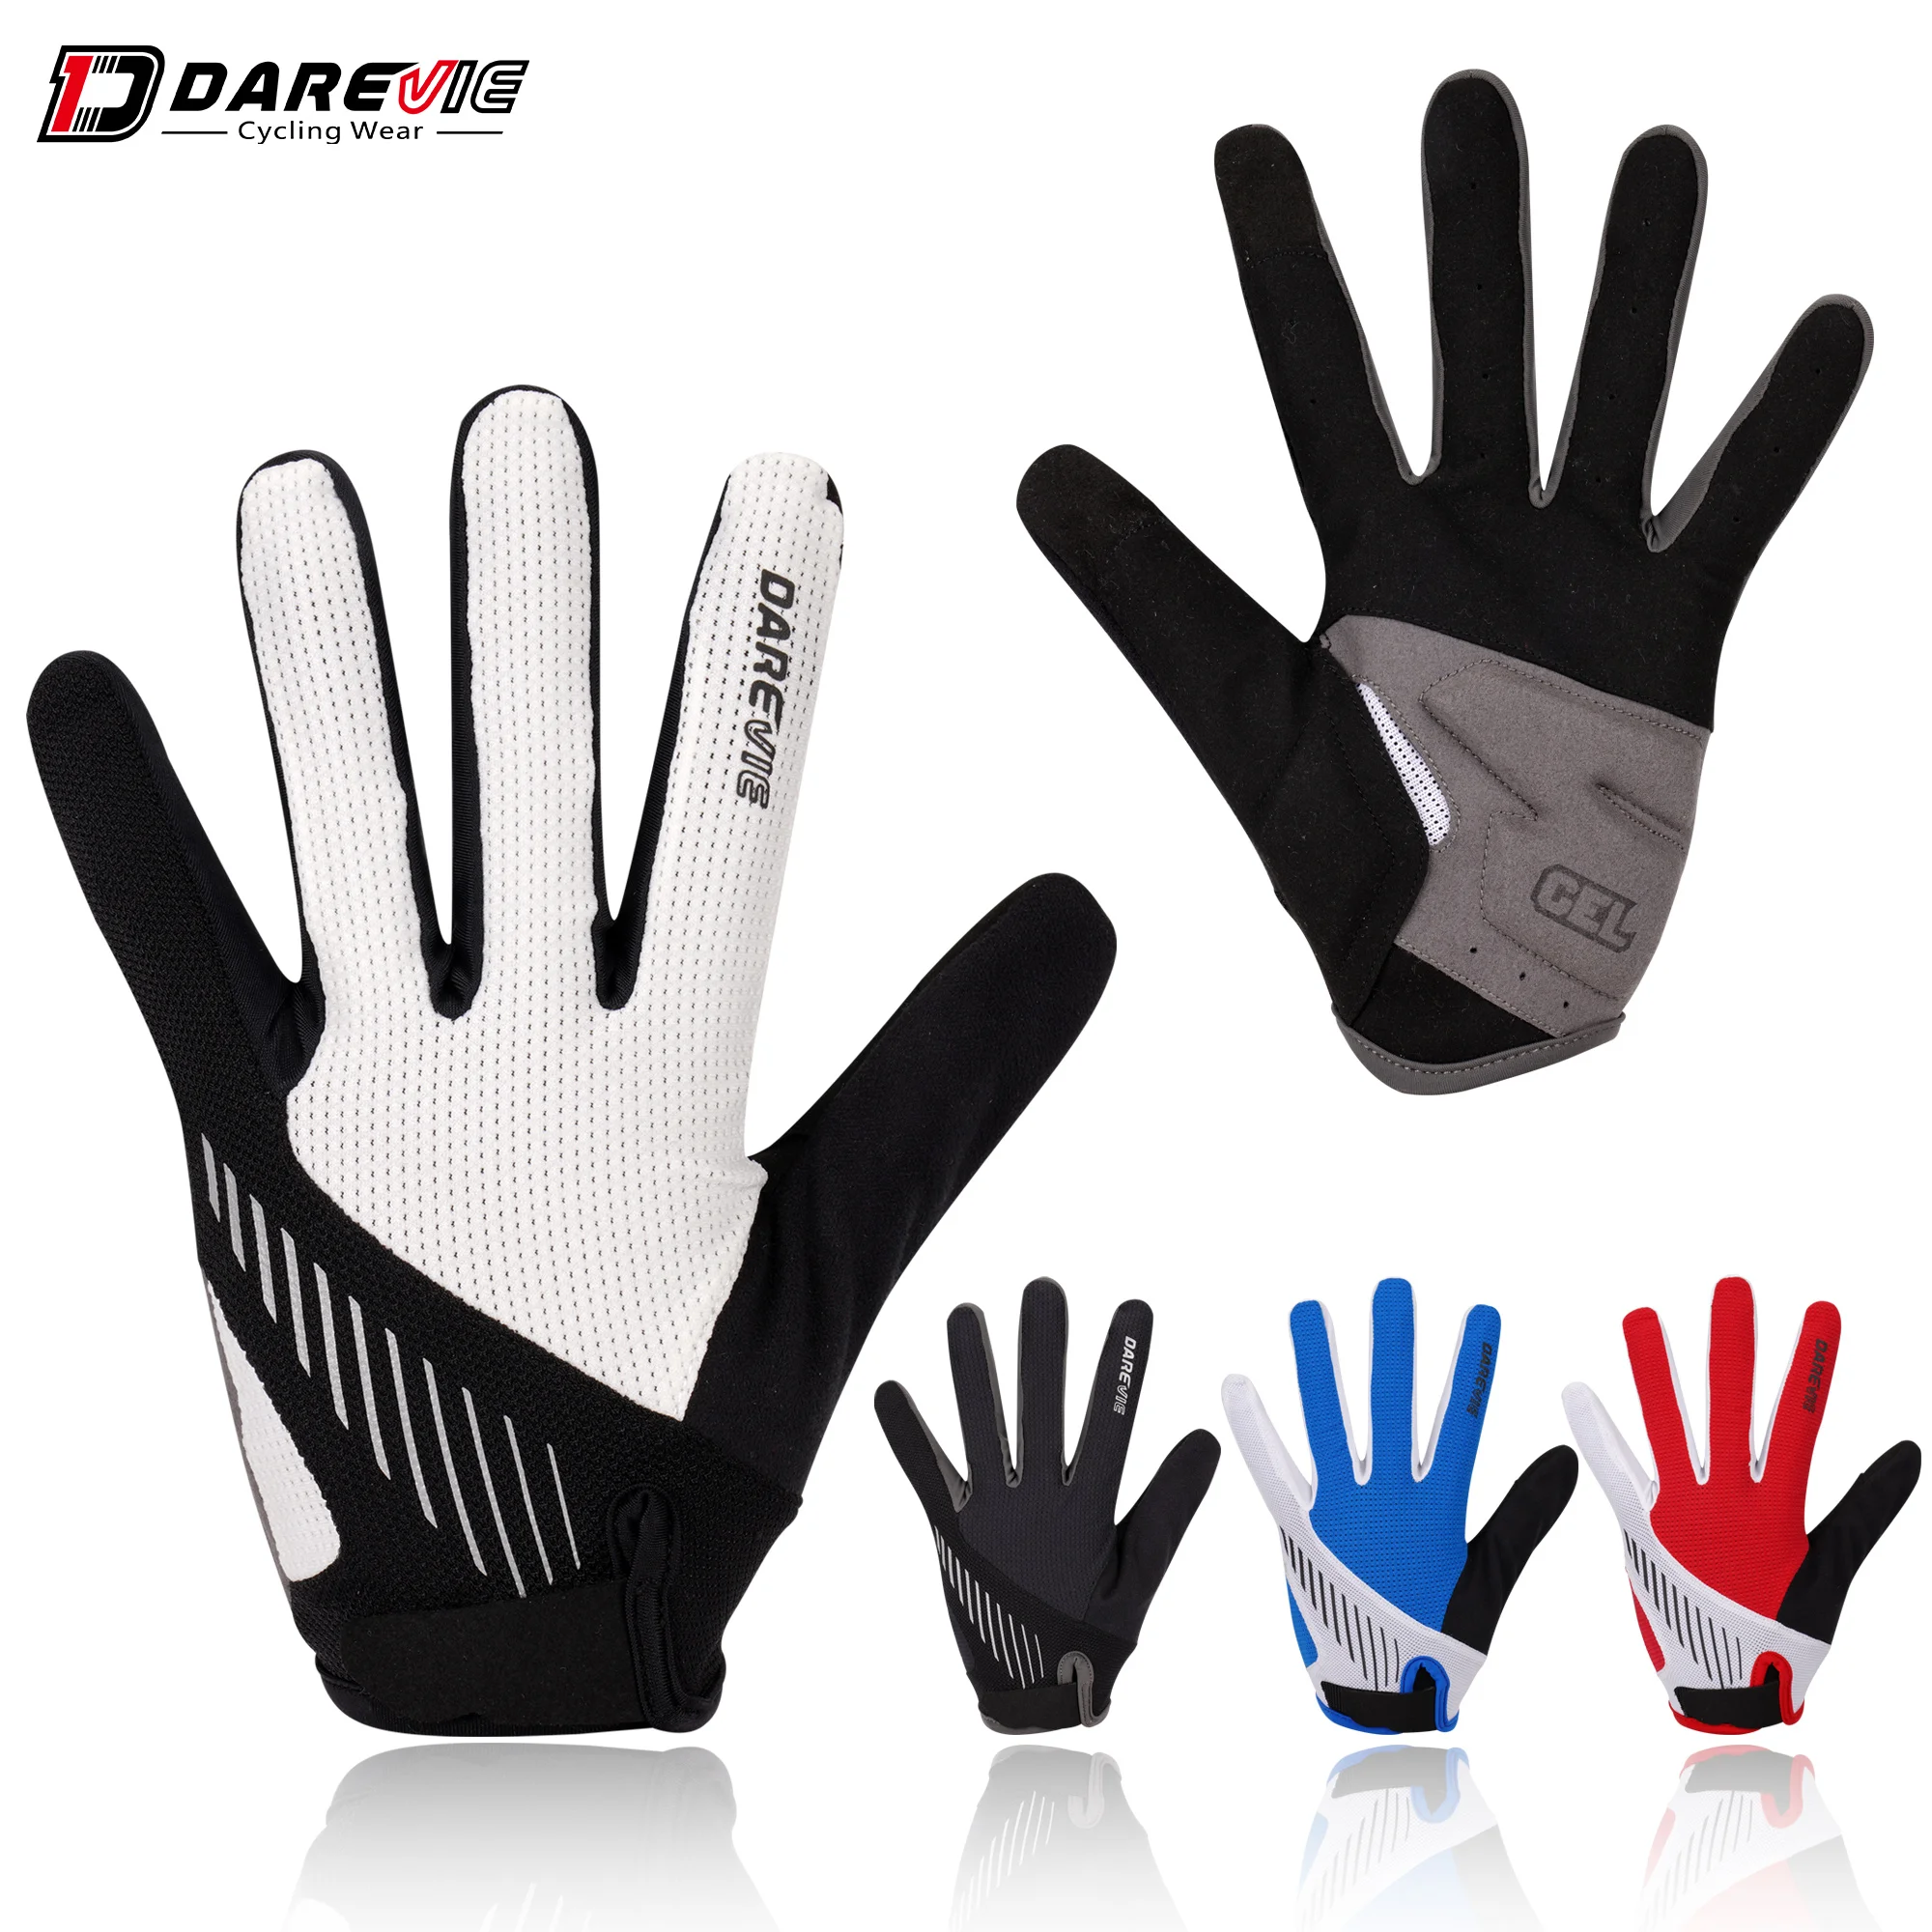 

DAREVIE Cycling Full Finger Gloves Taiwan Imported Gel Pad MTB Men Women Cycling Gloves Shockproof Sweat Breathable Bike Gloves